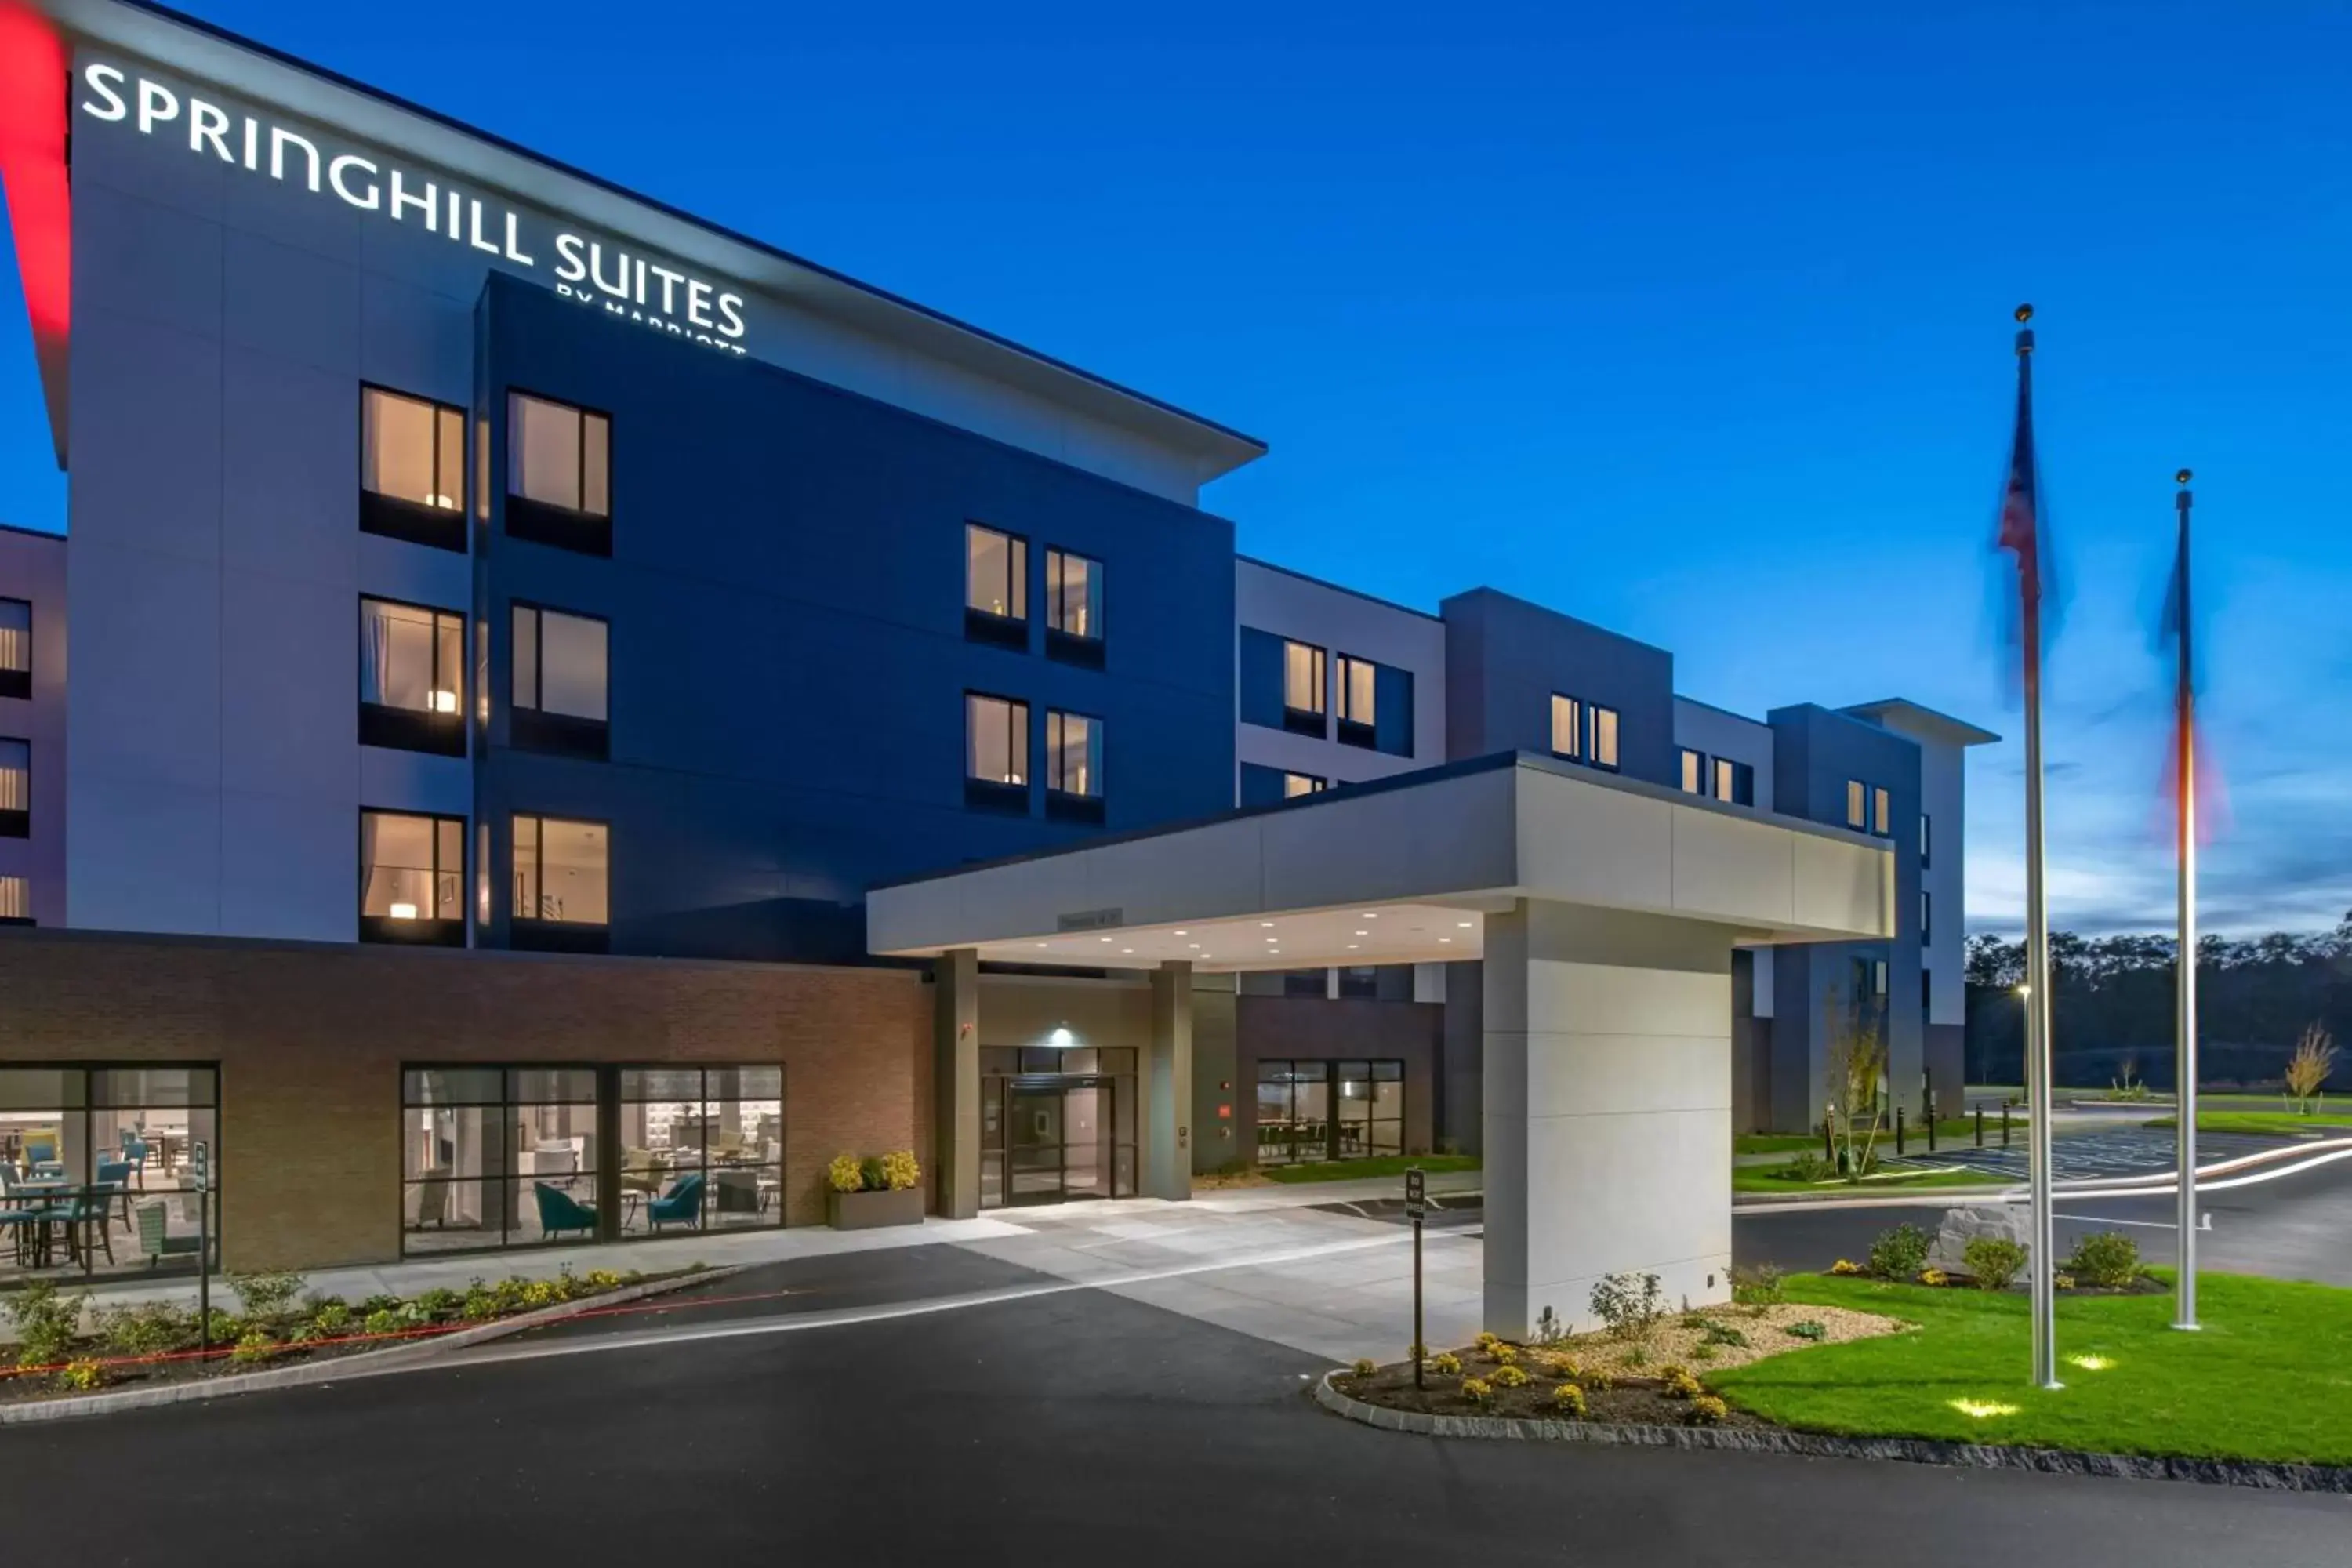 Property Building in SpringHill Suites By Marriott Wrentham Plainville